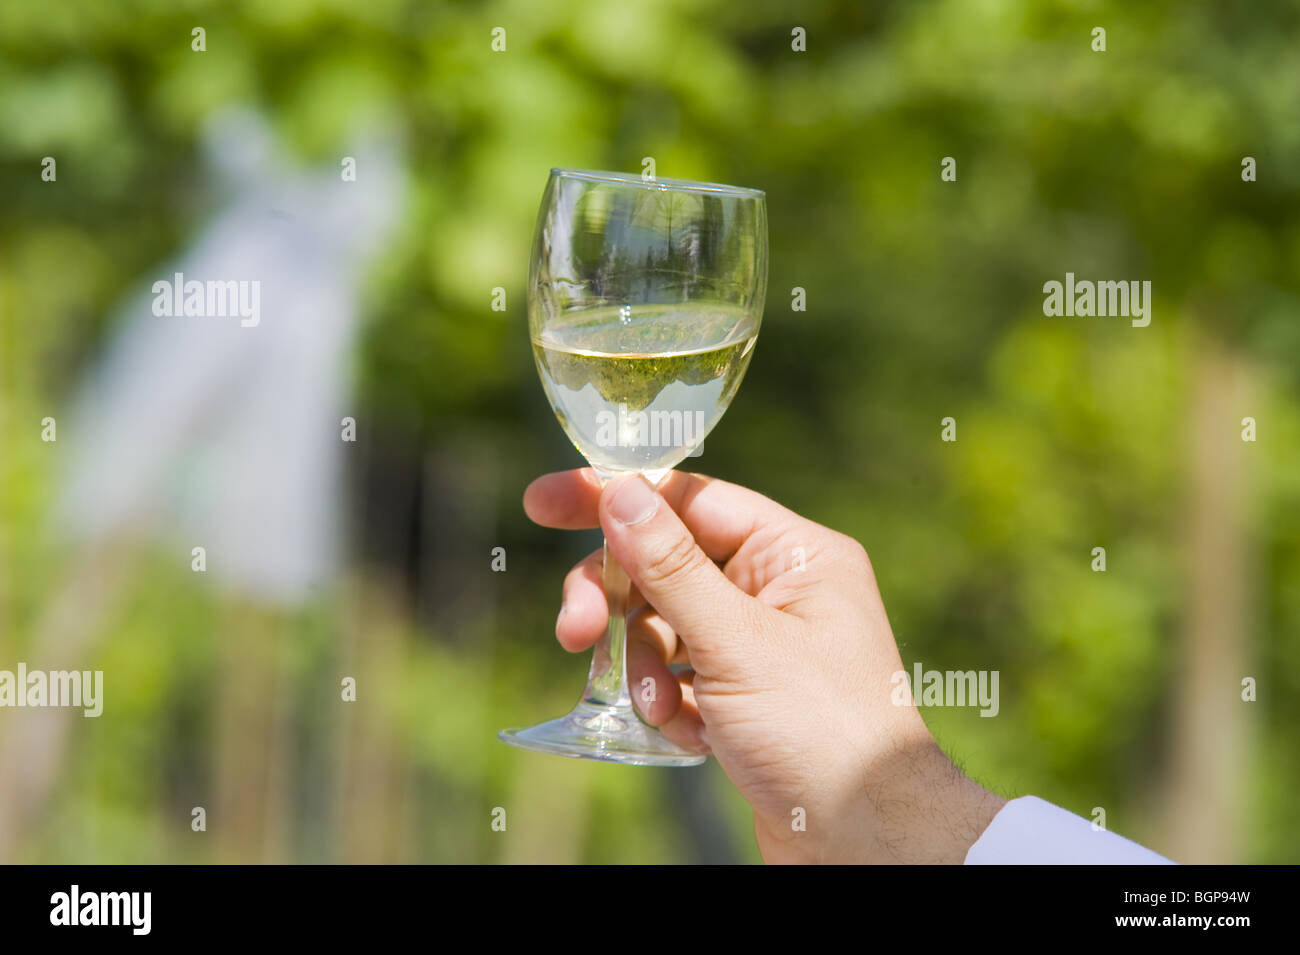 Person holding glass of white wine Stock Photo